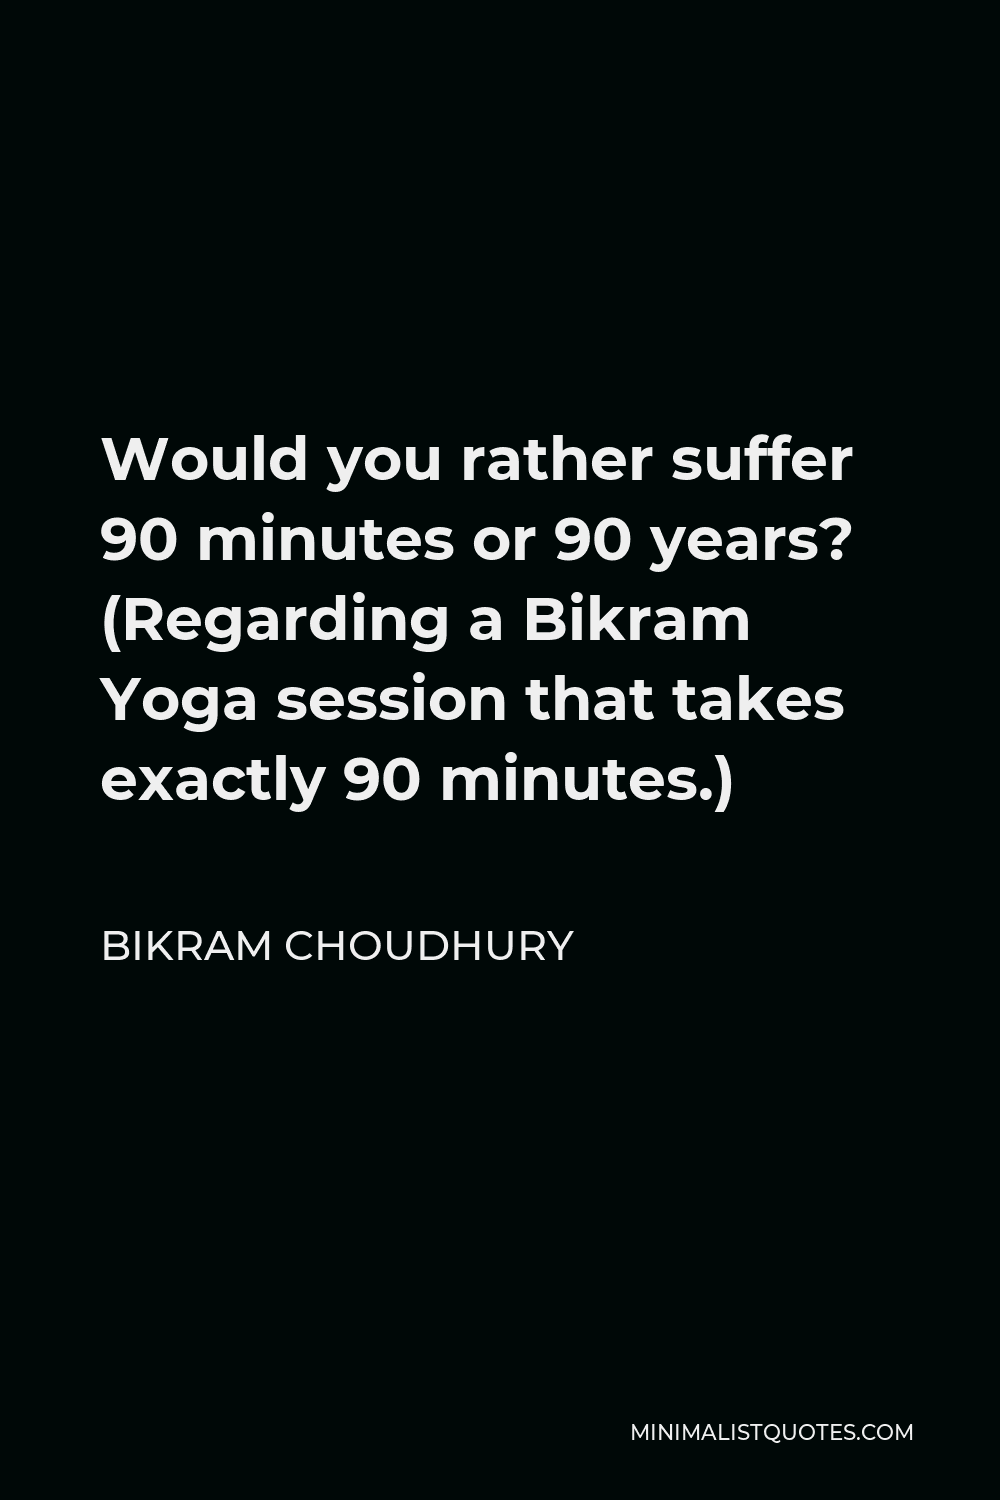 Bikram Choudhury Quote - Would you rather suffer 90 minutes or 90 years? (Regarding a Bikram Yoga session that takes exactly 90 minutes.)